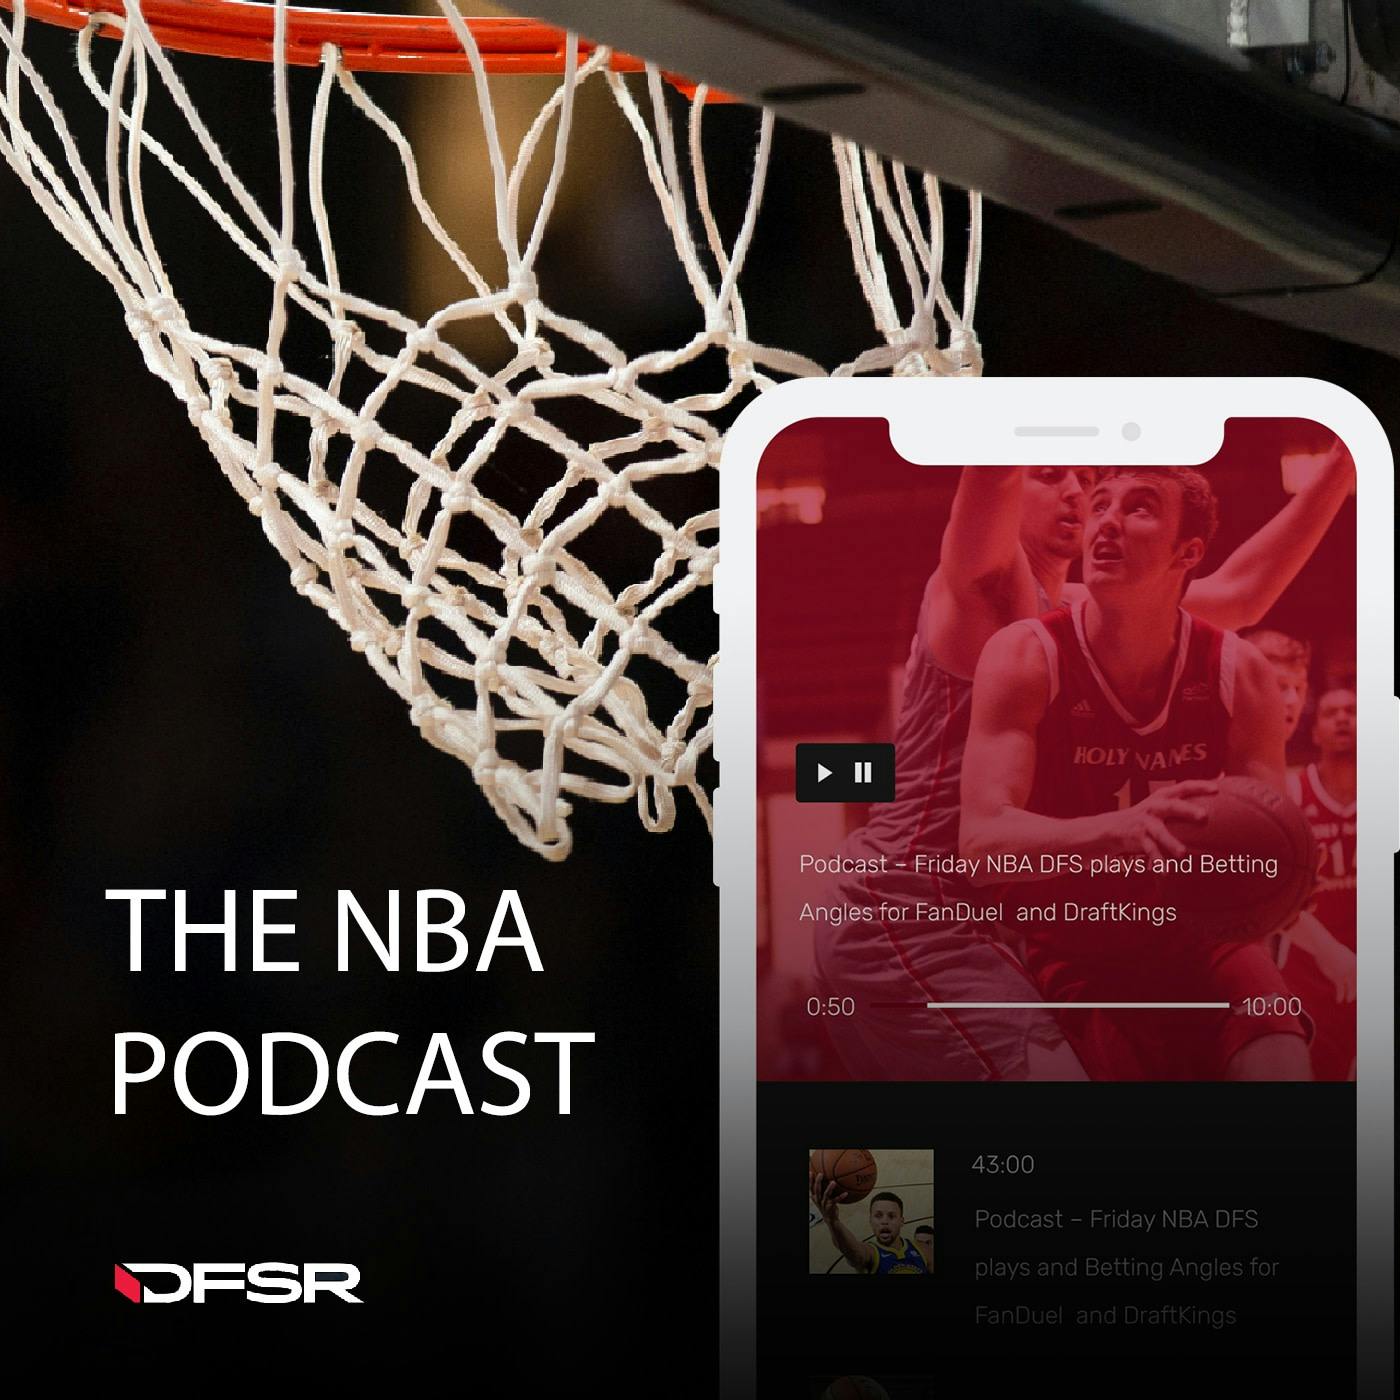 DFS NBA Podcast for Friday 10/31/18 - FanDuel and DraftKings